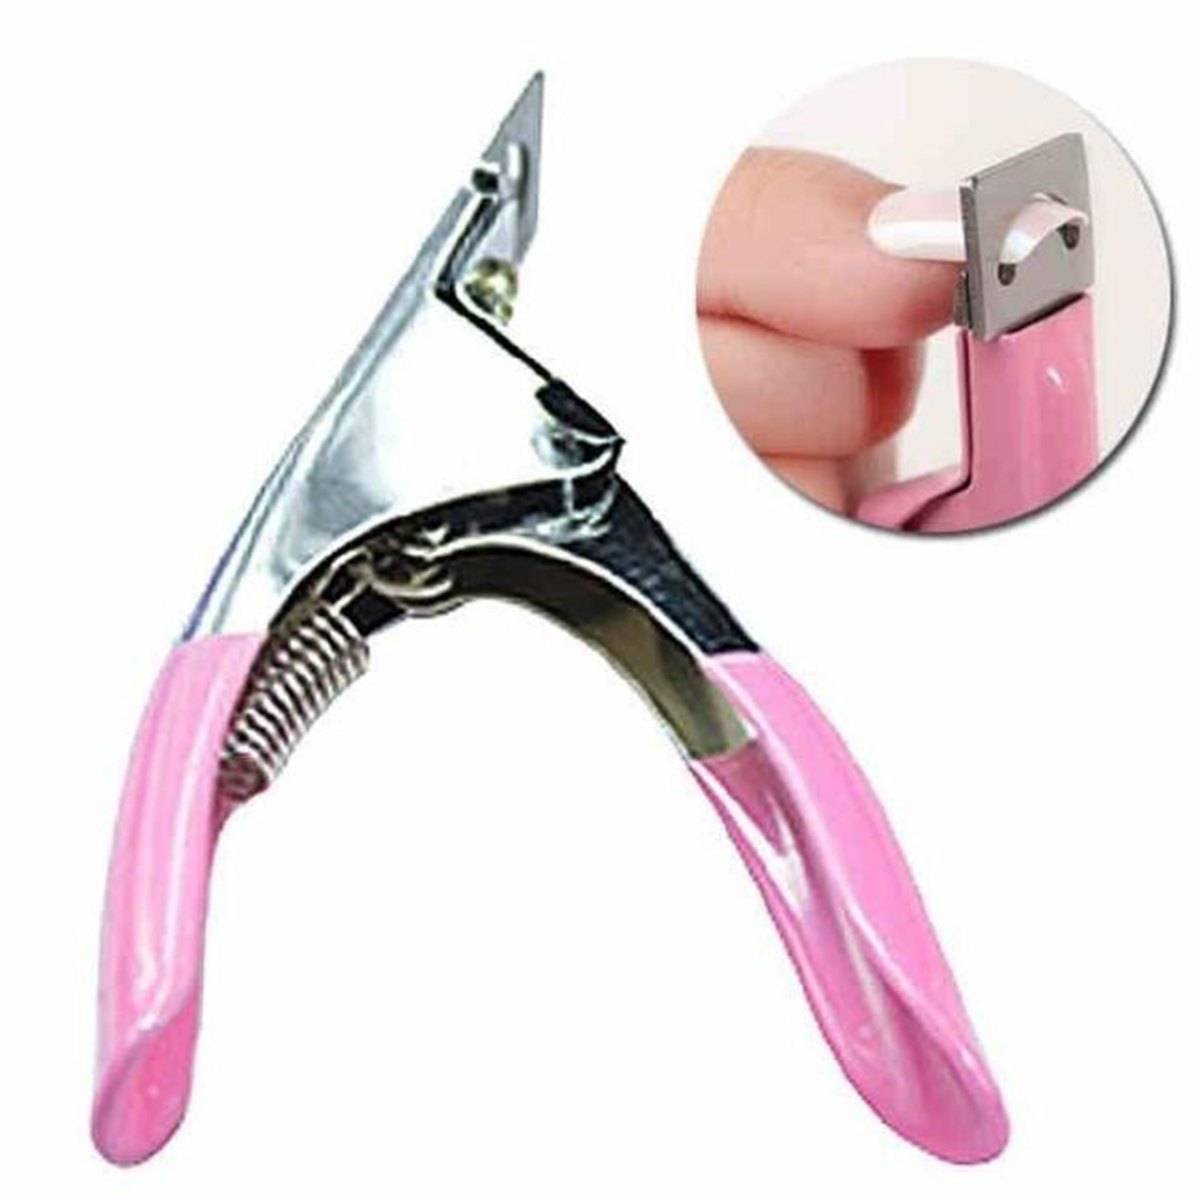 A+a Pets' Nail Cutter with Free Filer – www.aplusapets.com